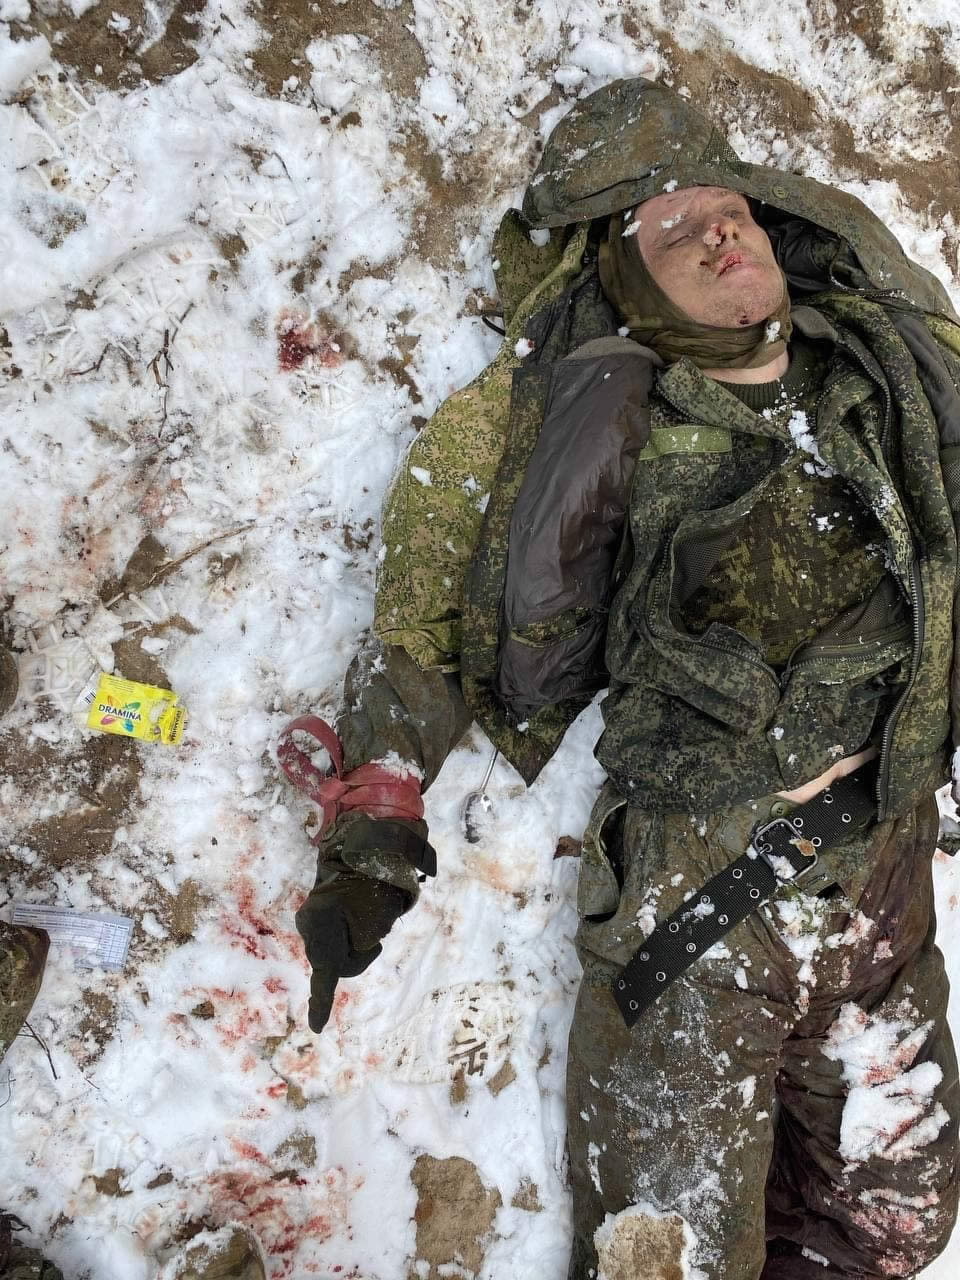 The corpse of a Russian military man in the snow. Ukraine